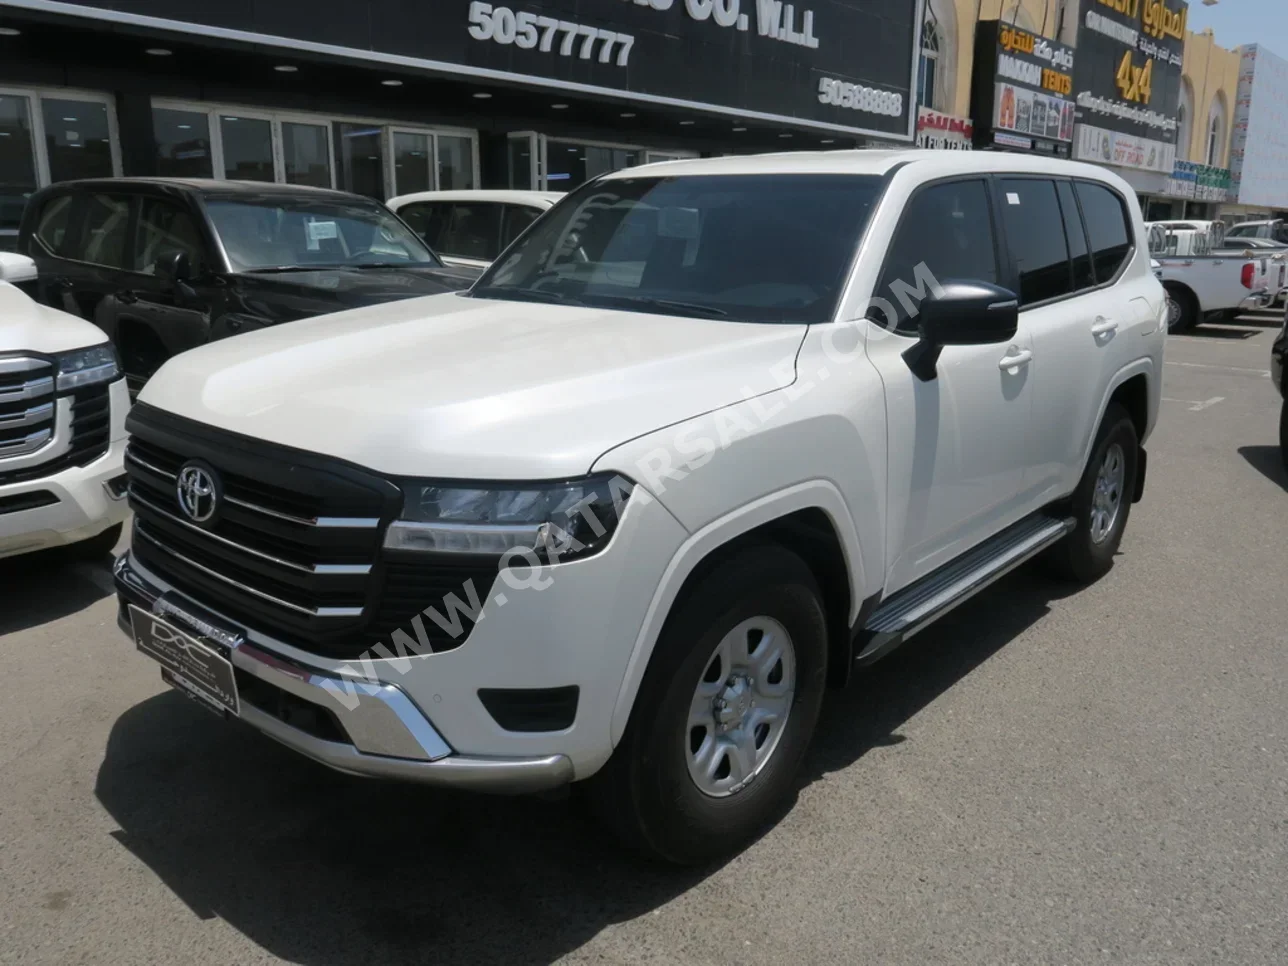 Toyota  Land Cruiser  GX  2023  Automatic  79,000 Km  6 Cylinder  Four Wheel Drive (4WD)  SUV  White  With Warranty